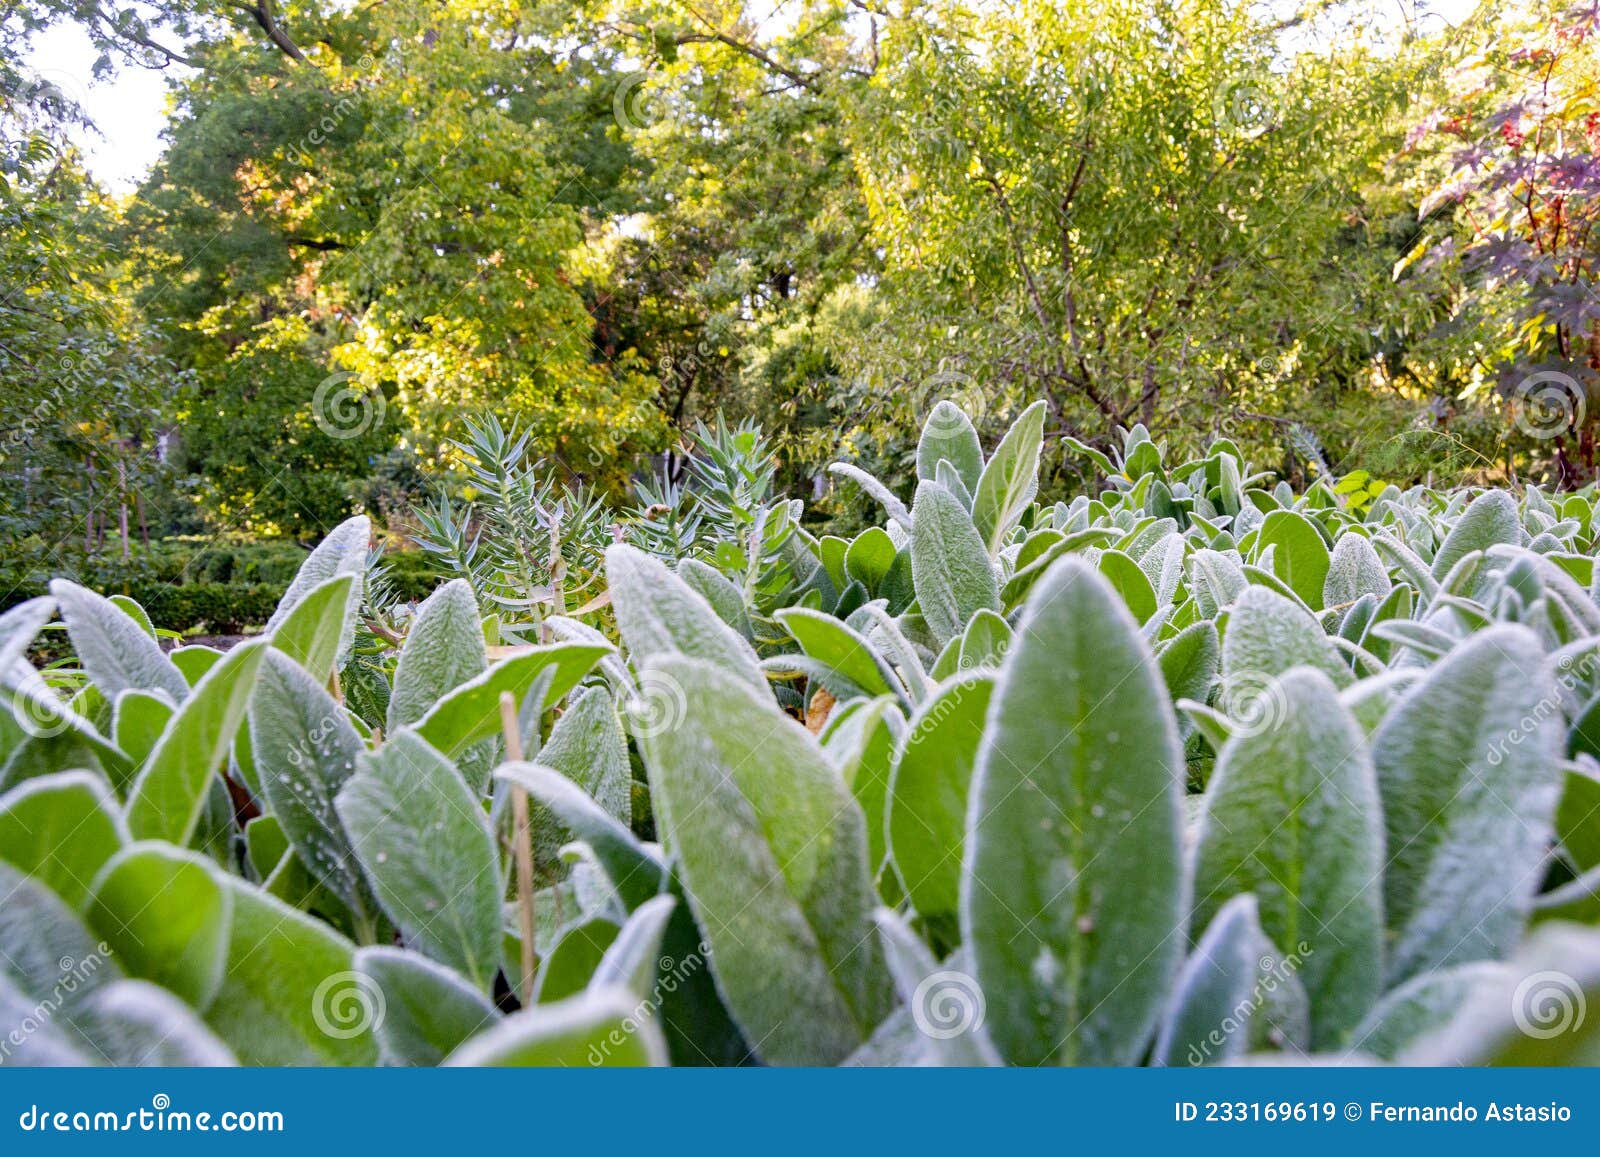 green plants with white hairs giving a sensation of cold, in the real jardÃÂ­n botÃÂ¡nico de madrid, in spain. europe.